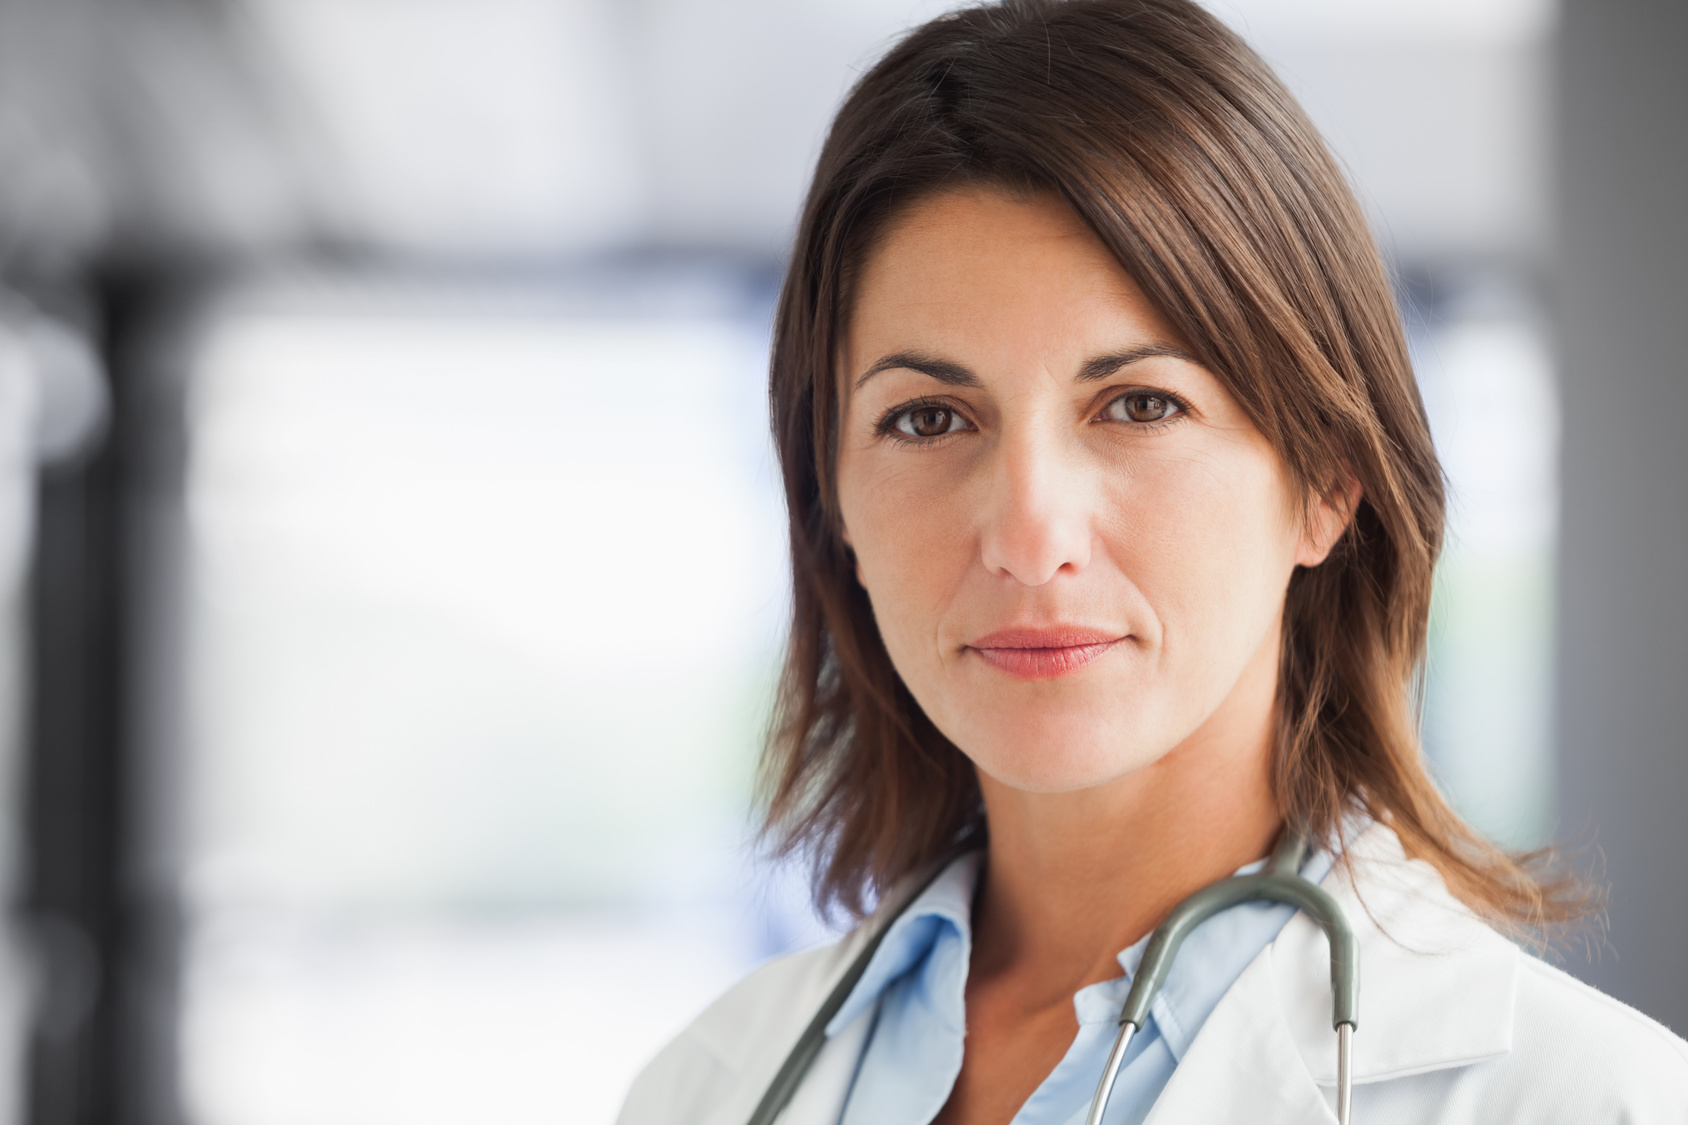 Women (and Discrimination) in Healthcare